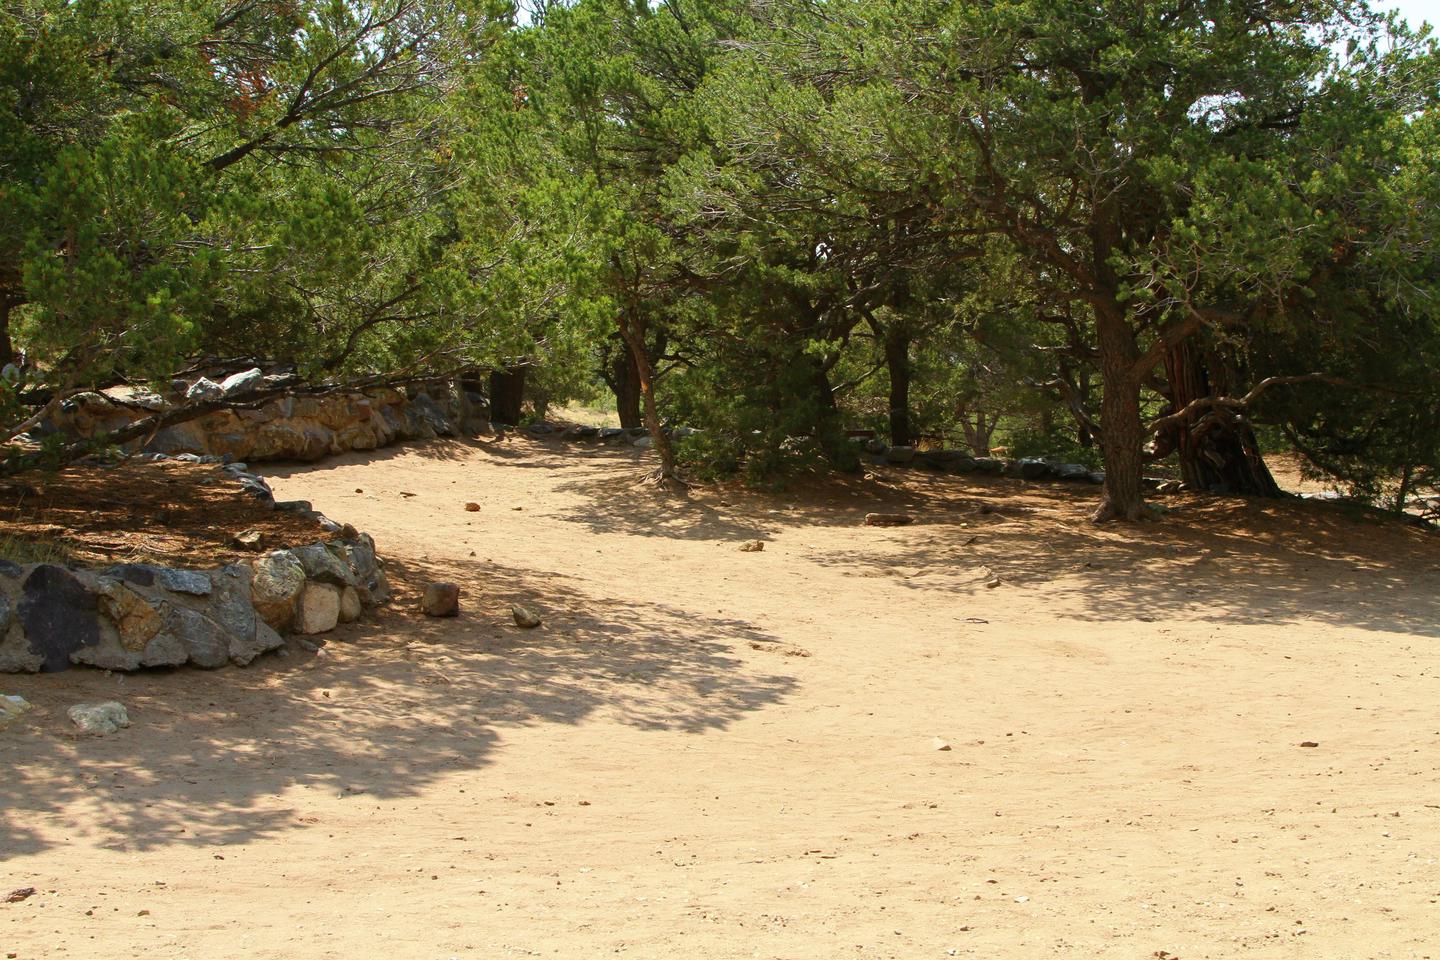 View of Group Site "B" tent area, showing rock wall border and surrounding trees.Group Site B, Pinon Flats Campground